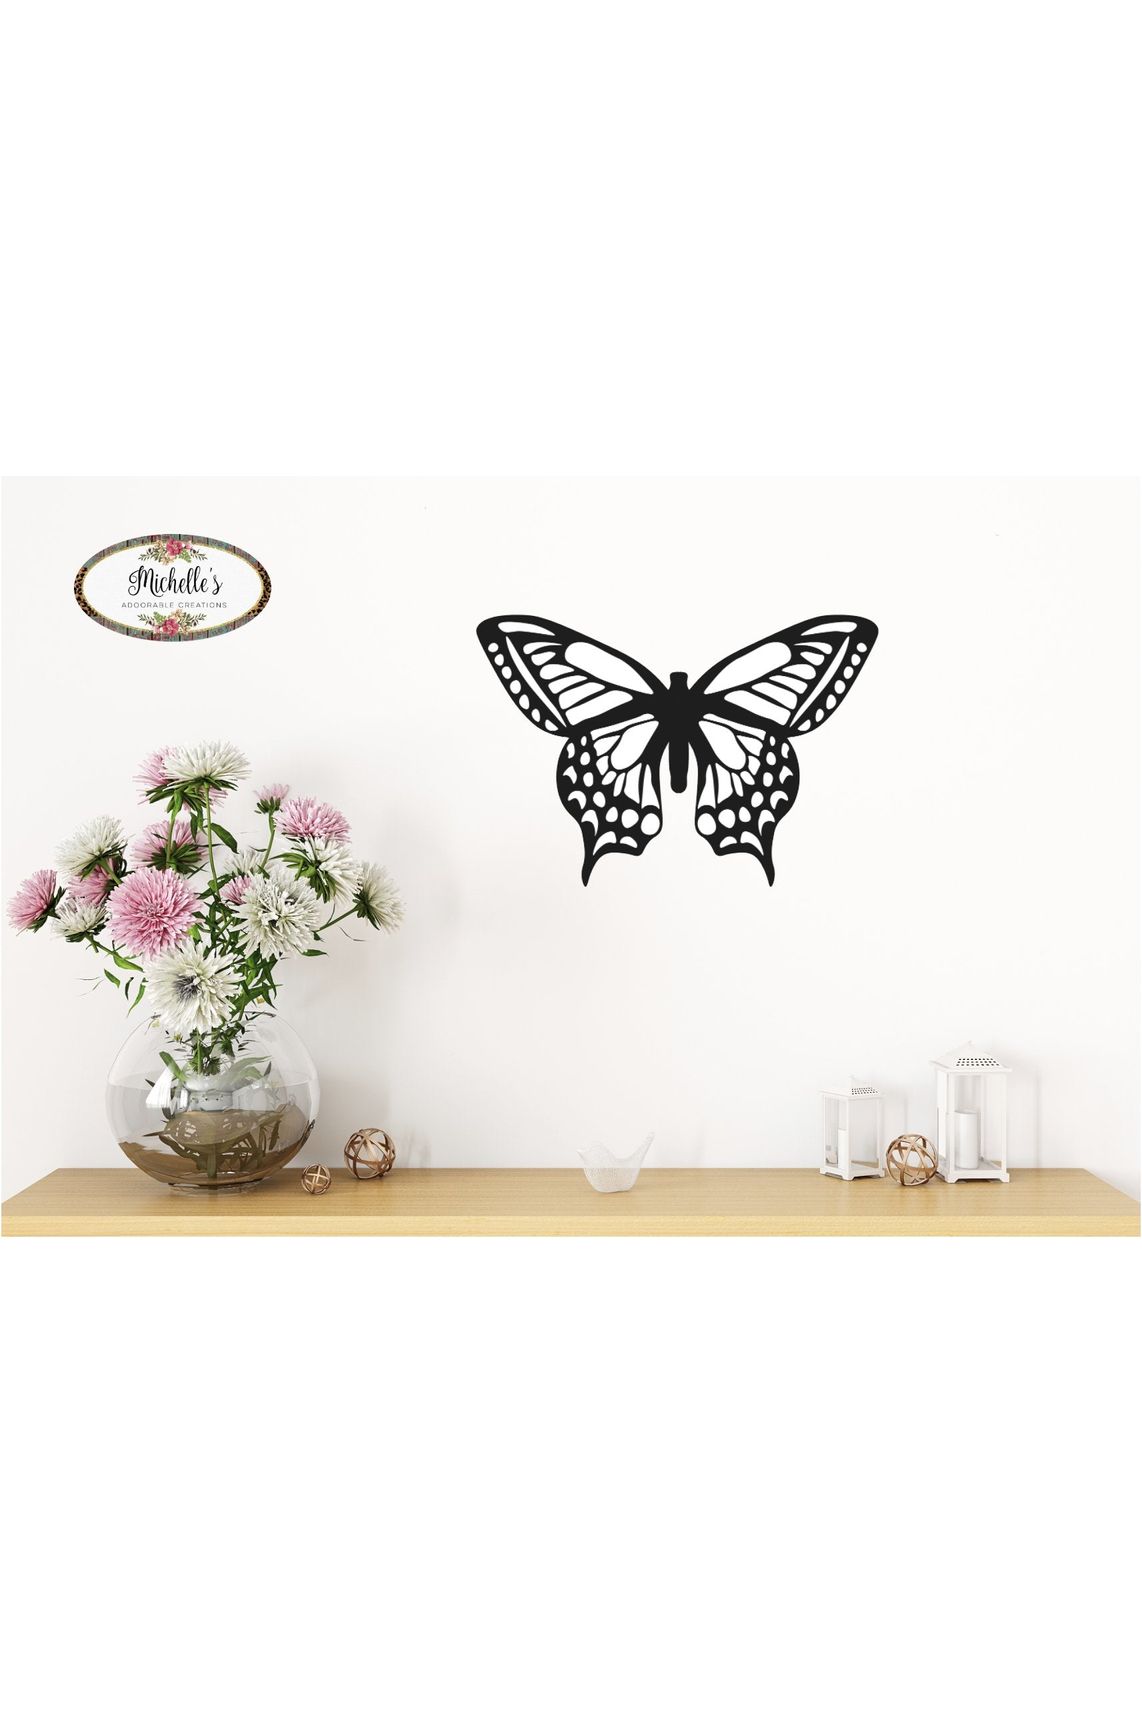 Shop For Waterproof Butterfly Accent: Black & White